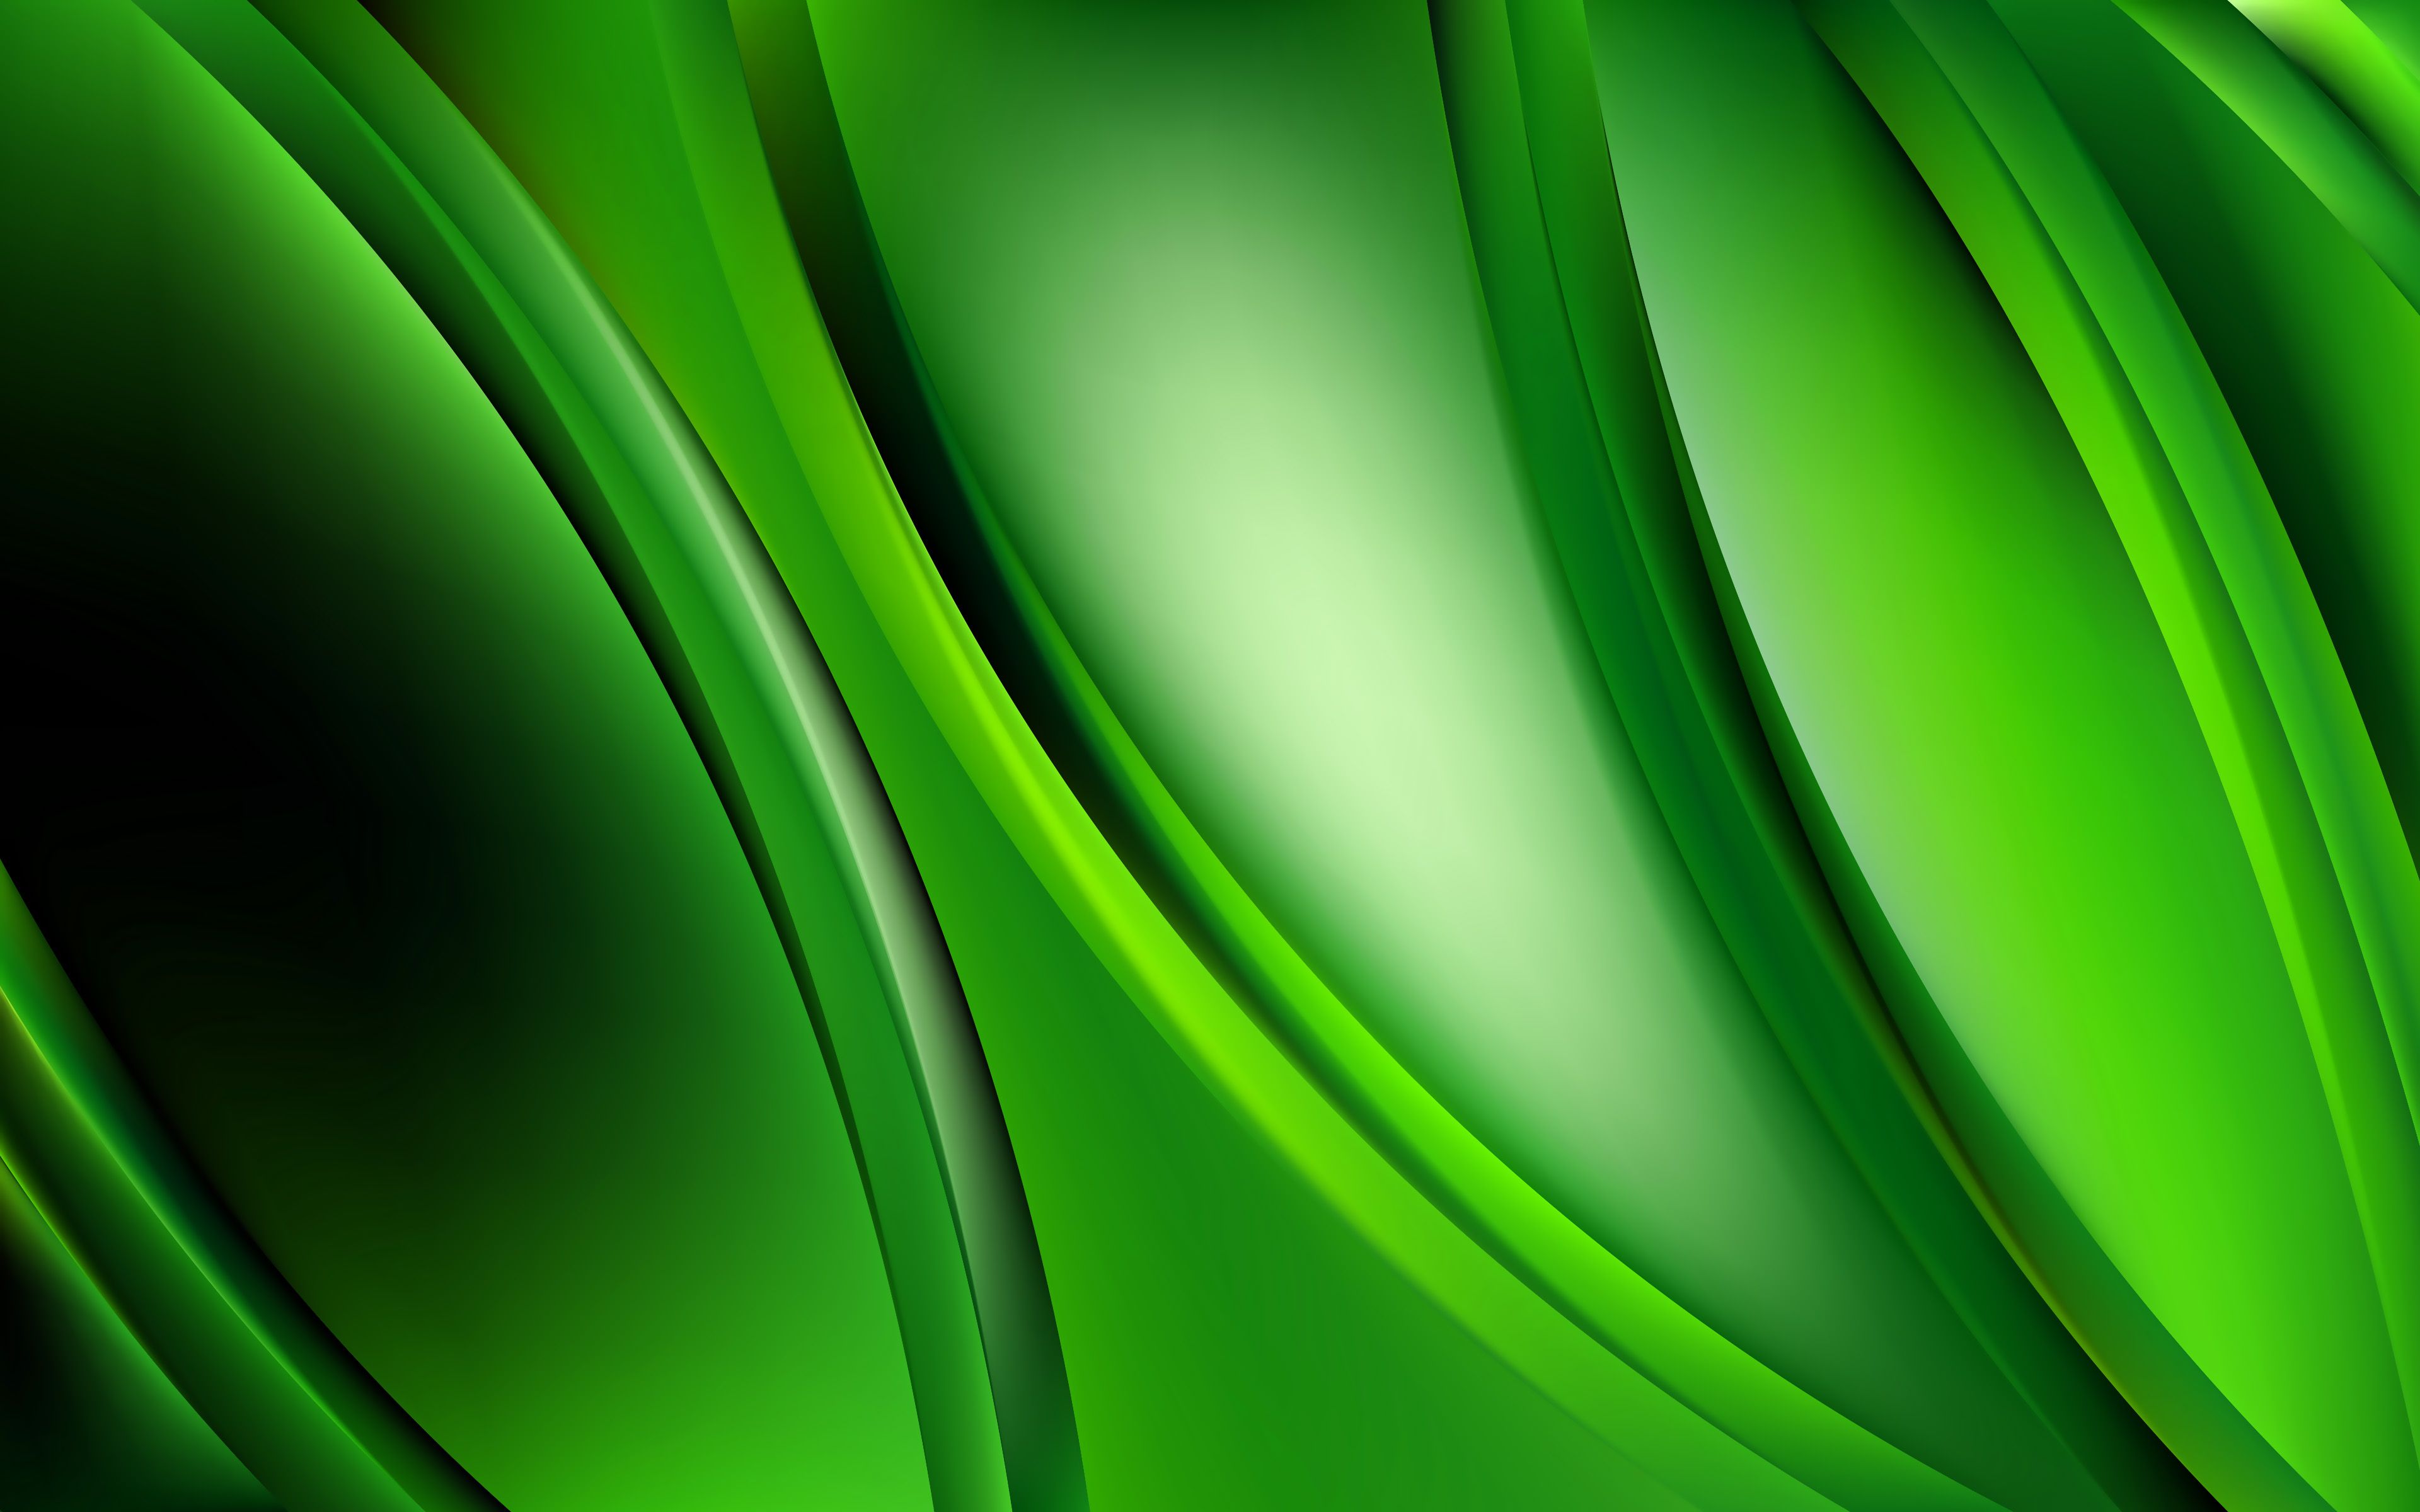 Download wallpaper green abstract waves, 4k, 3D art, abstract art, green wavy background, abstract waves, creative, green background, waves textures, green 3D waves for desktop with resolution 3840x2400. High Quality HD picture